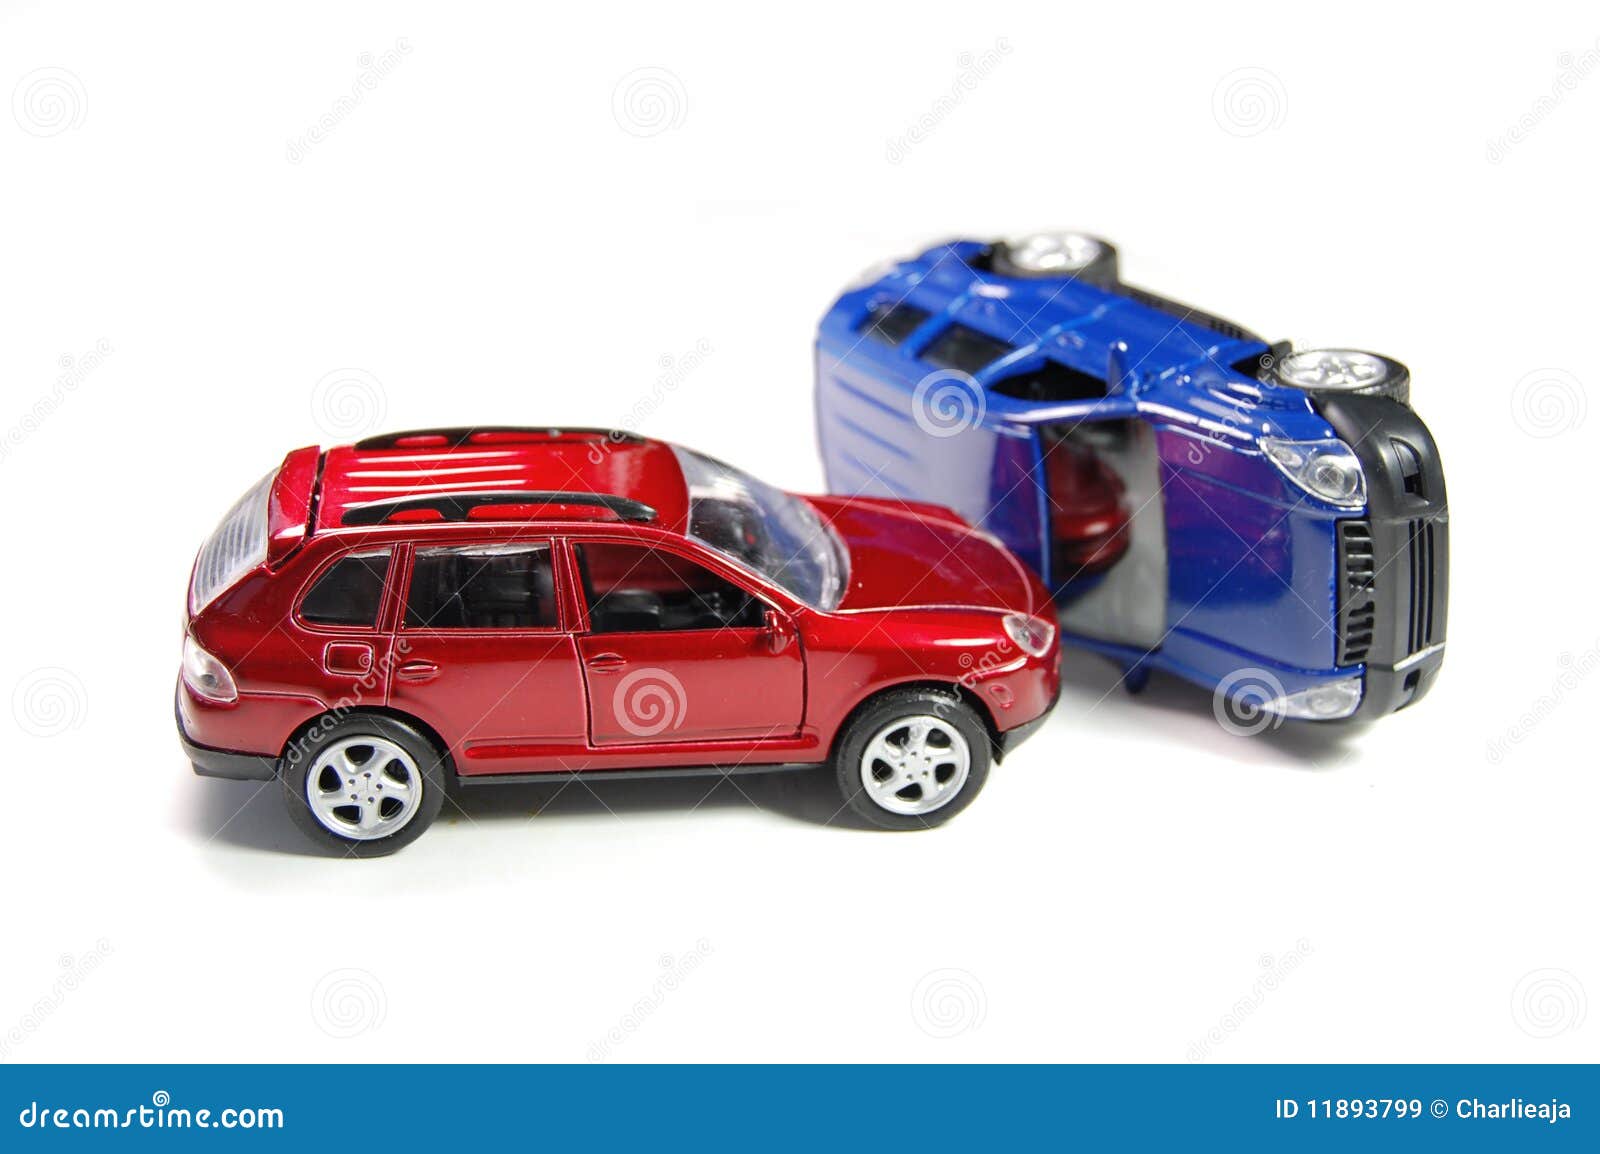 Car Accident Insurance Royalty Free Stock Images  Image: 11893799